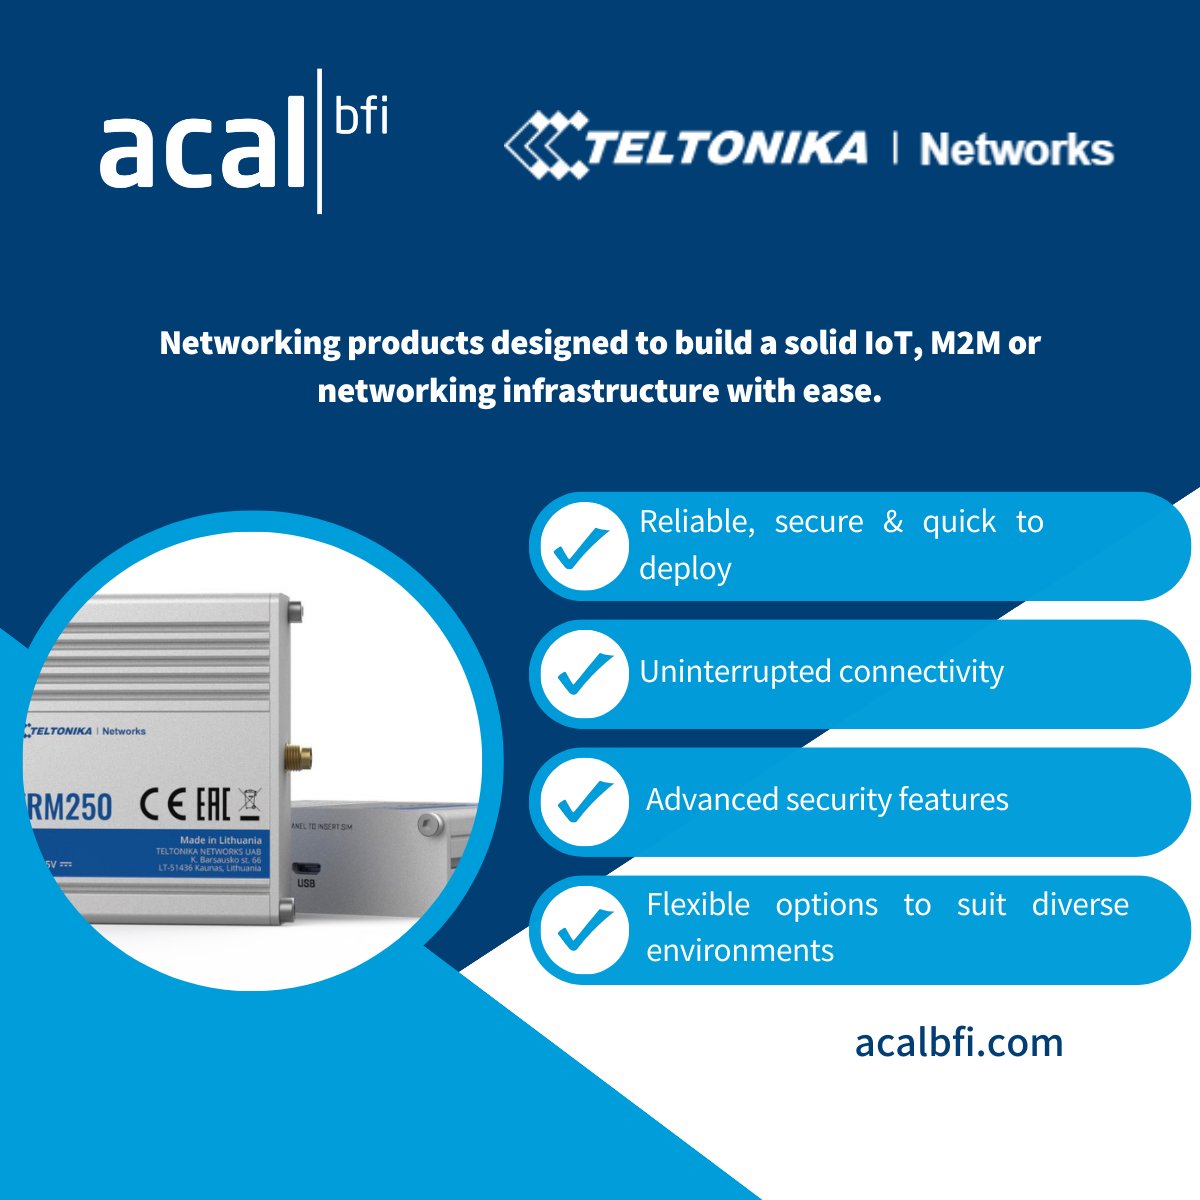 Discover Teltonika Networks' cutting-edge routers, gateways, switches and modems - engineered for excellence in every environment. bit.ly/49nwID5 are your trusted partner for ensuring your project is nothing short of seamless. #NetworkingInnovation #ConnectivityUnleashed